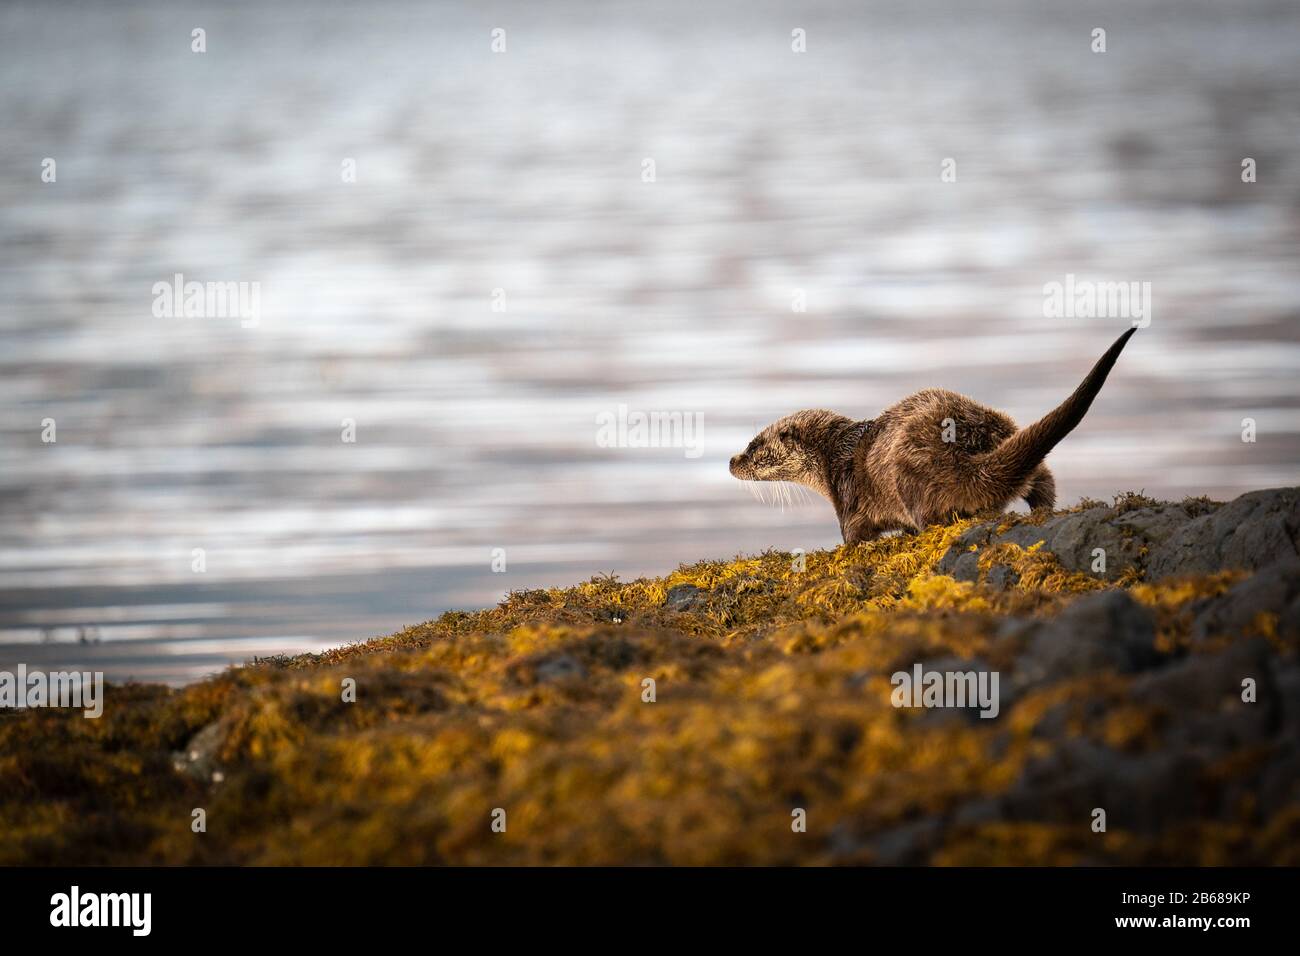 Relaxed female European Otter (Lutra lutra) strolling back to the loch shore to resume fishing Stock Photo